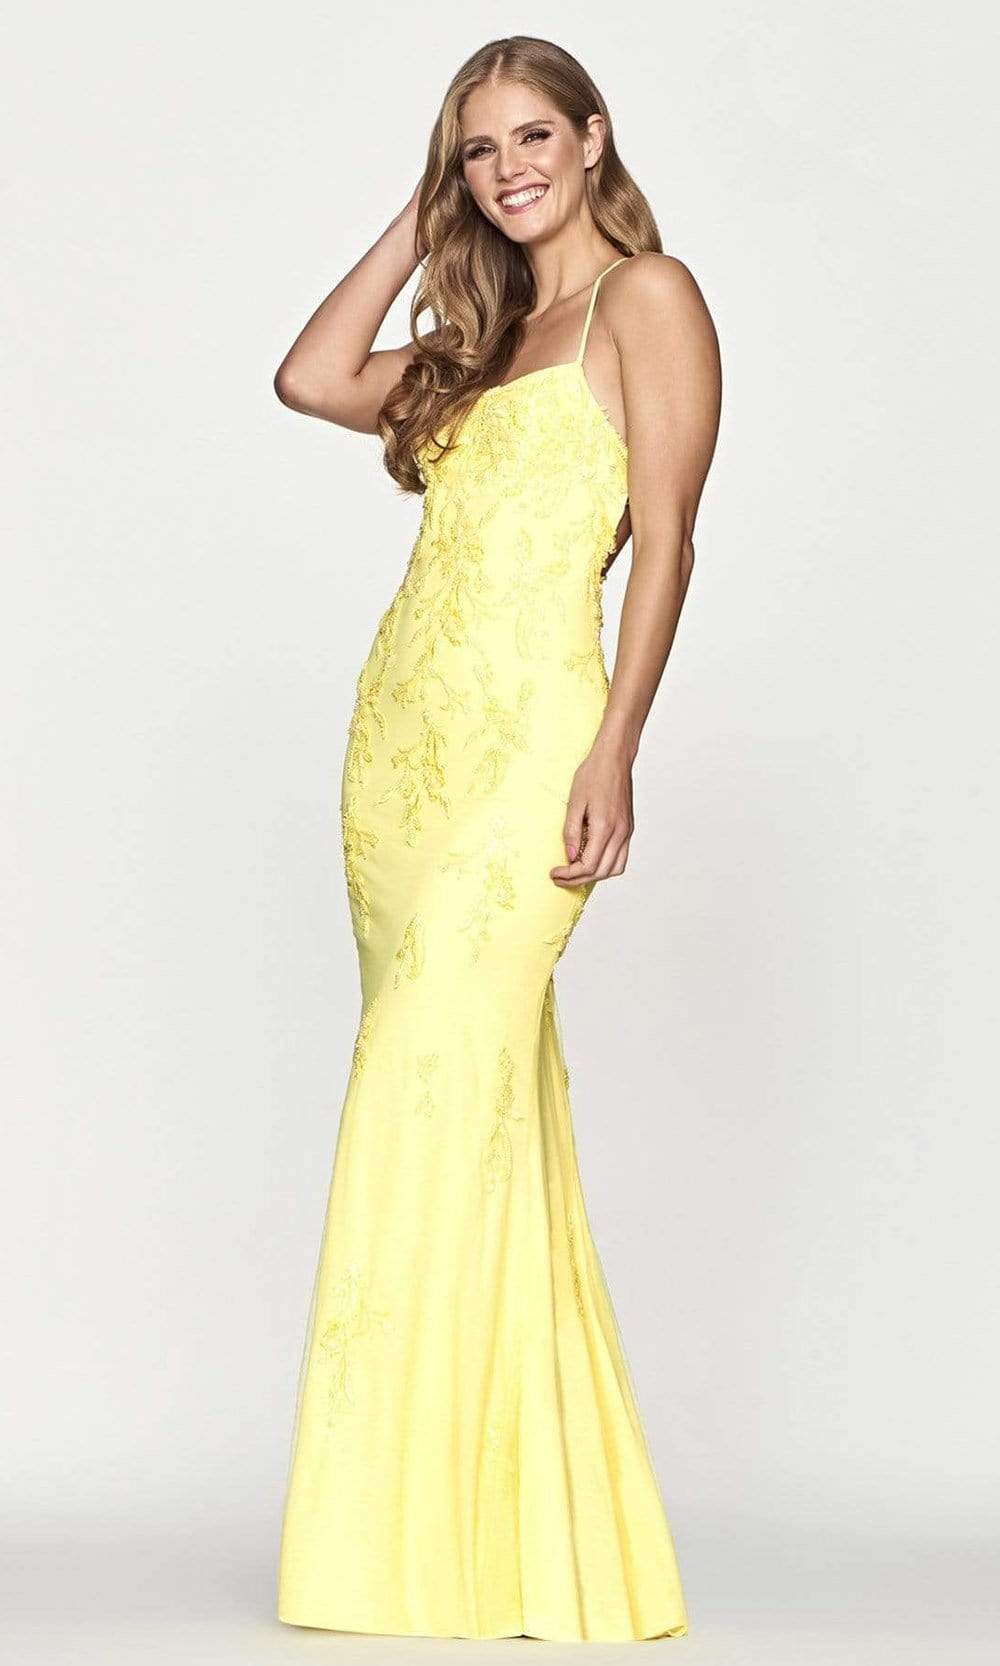 Faviana - S10634 Sleeveless Lace Appliqued Gown Evening Dresses 00 / Light Yellow